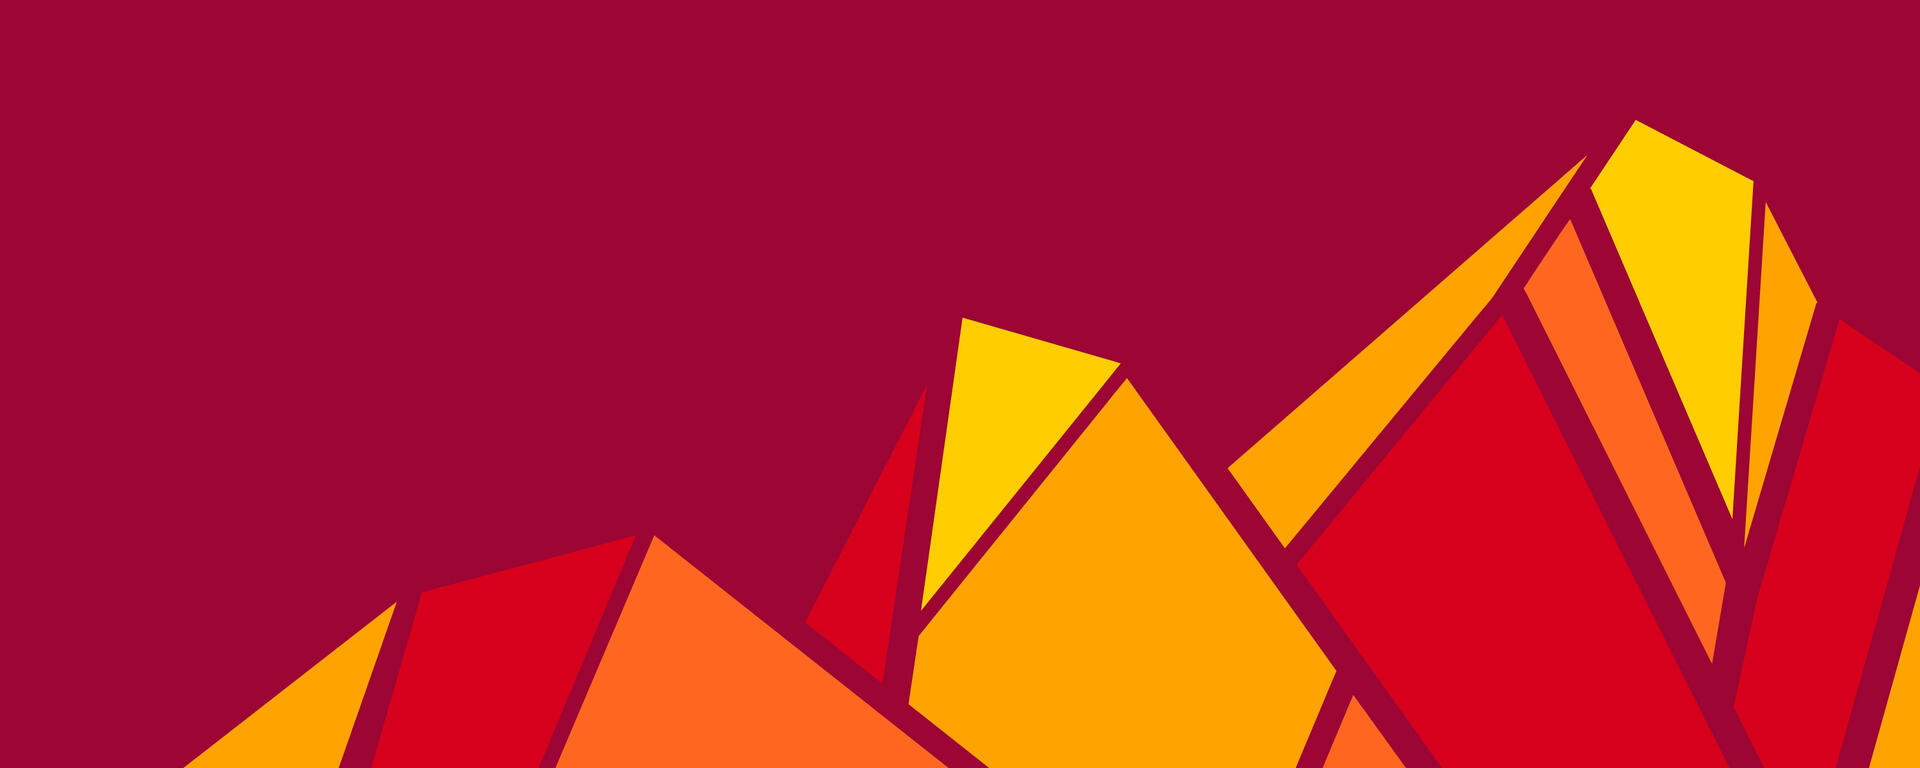 Graphic with red background. Orange, red and yellow geometric shapes in foreground